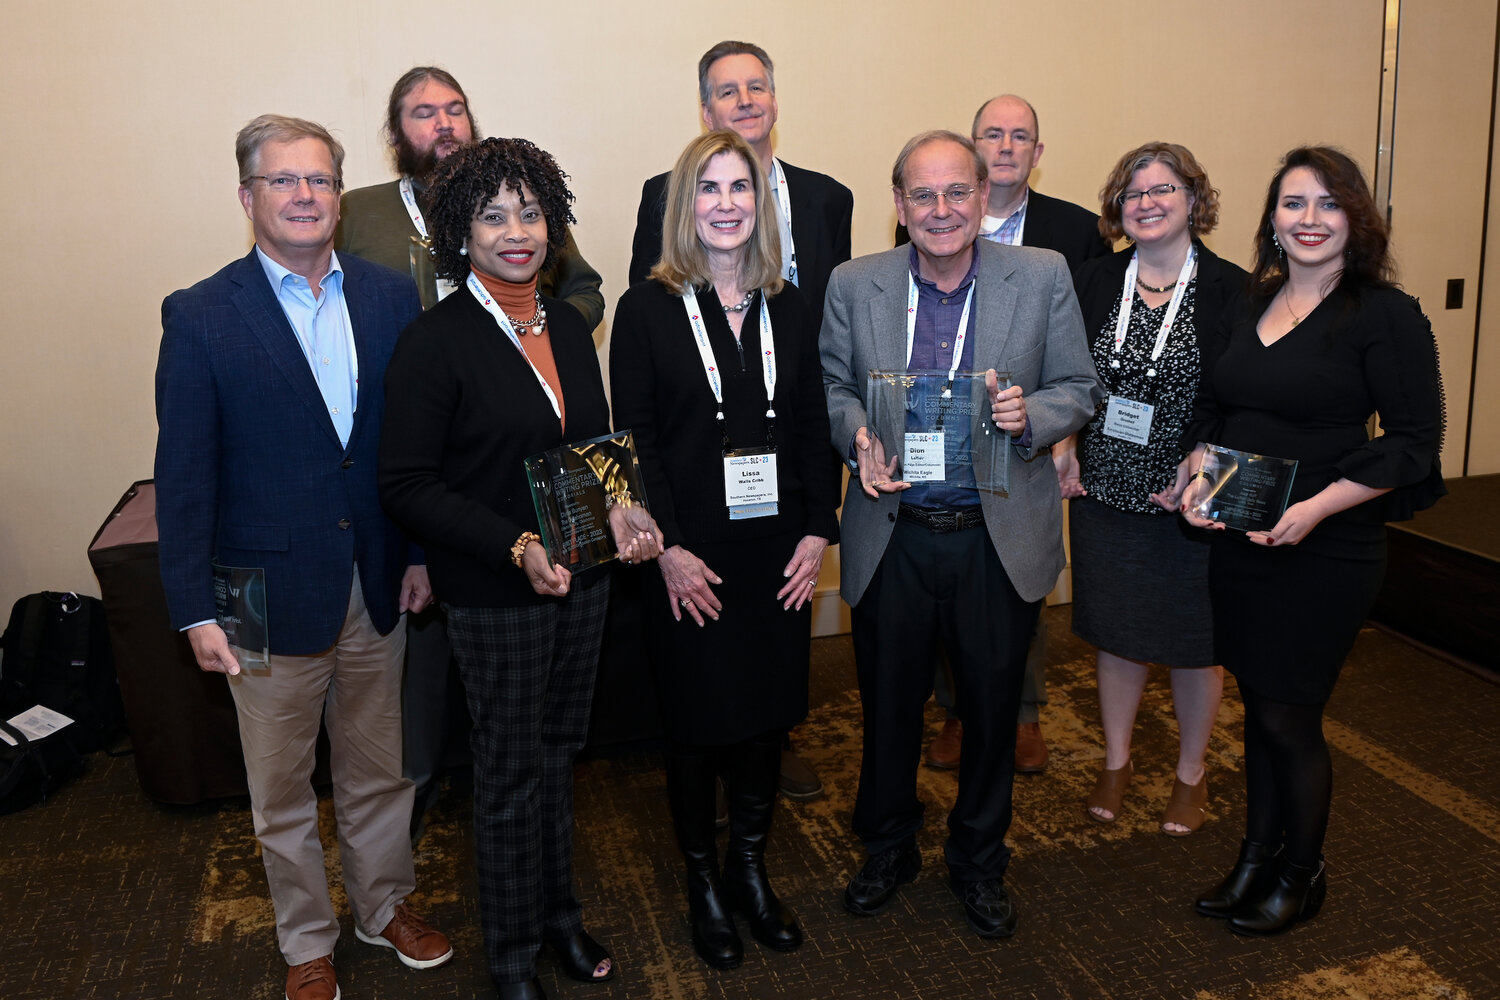 Pictured with Lissa Walls Cribb, CEO, of Southern Newspapers, (front center) who presented this year's Carmage Walls Commentary Prizes are: (left to right - front row): David Woronoff, The Pilot, Southern Pines, North Carolina; Clytie Bunyan, The Oklahoman; Dion Lefler, The Wichita Eagle; Bridget Grumet, Austin American-Statesman; and Jess Huff, Lufkin Daily News. Back row (left to right): Dave Coffey, The Berkshire Eagle; Dave Stafford, The Republic (Columbus, Indiana); and Brier Dudley, The Seattle Times (Photo by Matt Marton @martonphoto)